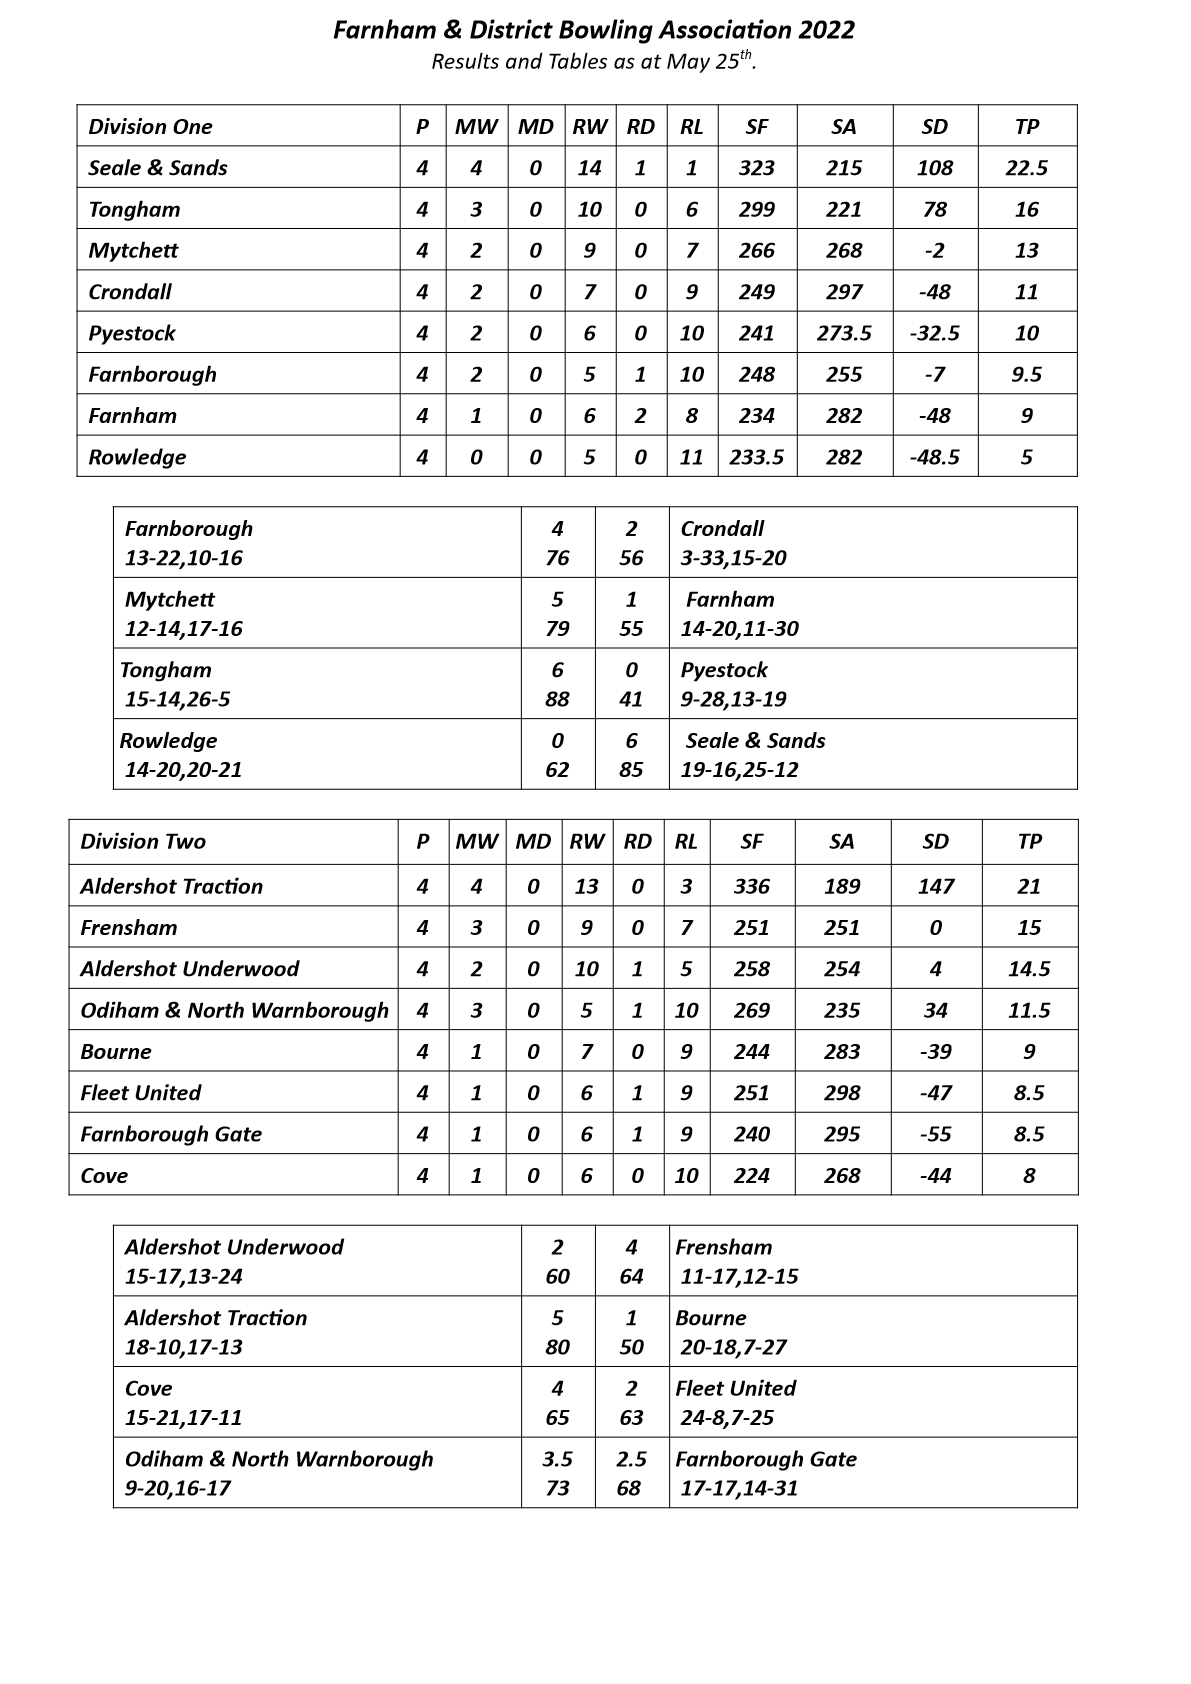  Farnham&District Bowling Association  Tables & Results as at May 25th